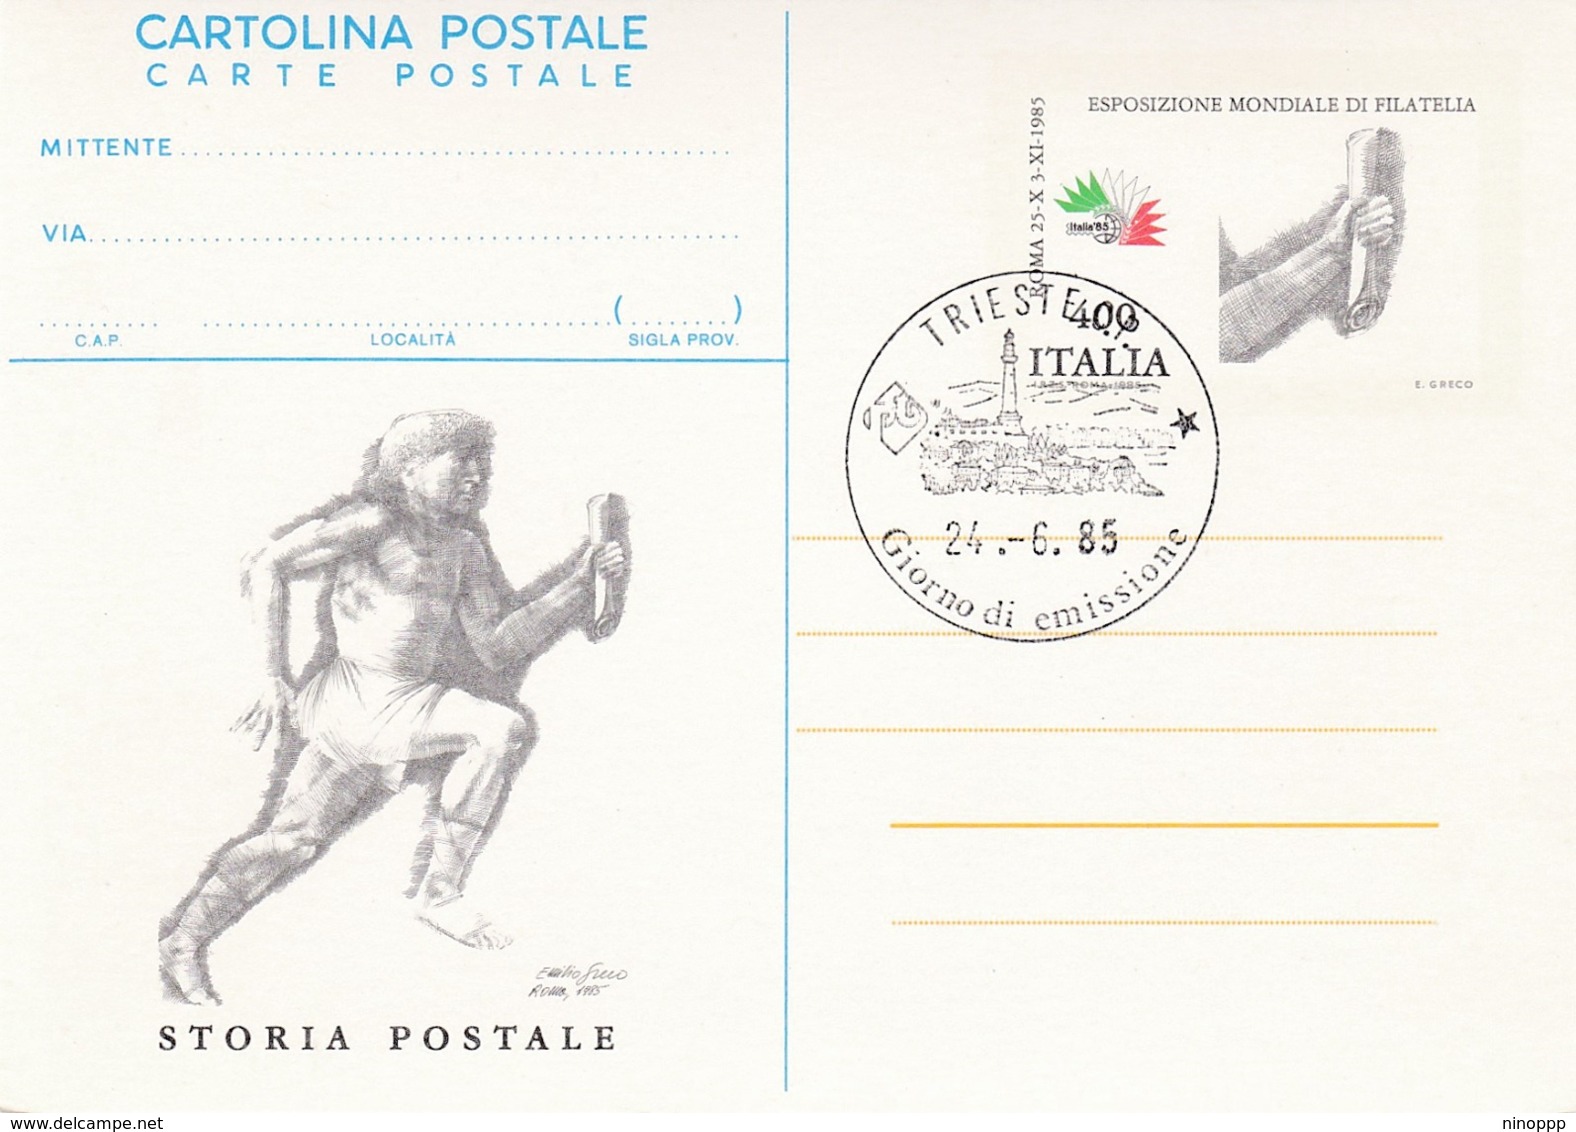 Italy CP 60 1985 Italia 85 Runner,Cartolina Postale,FDC - Stamped Stationery